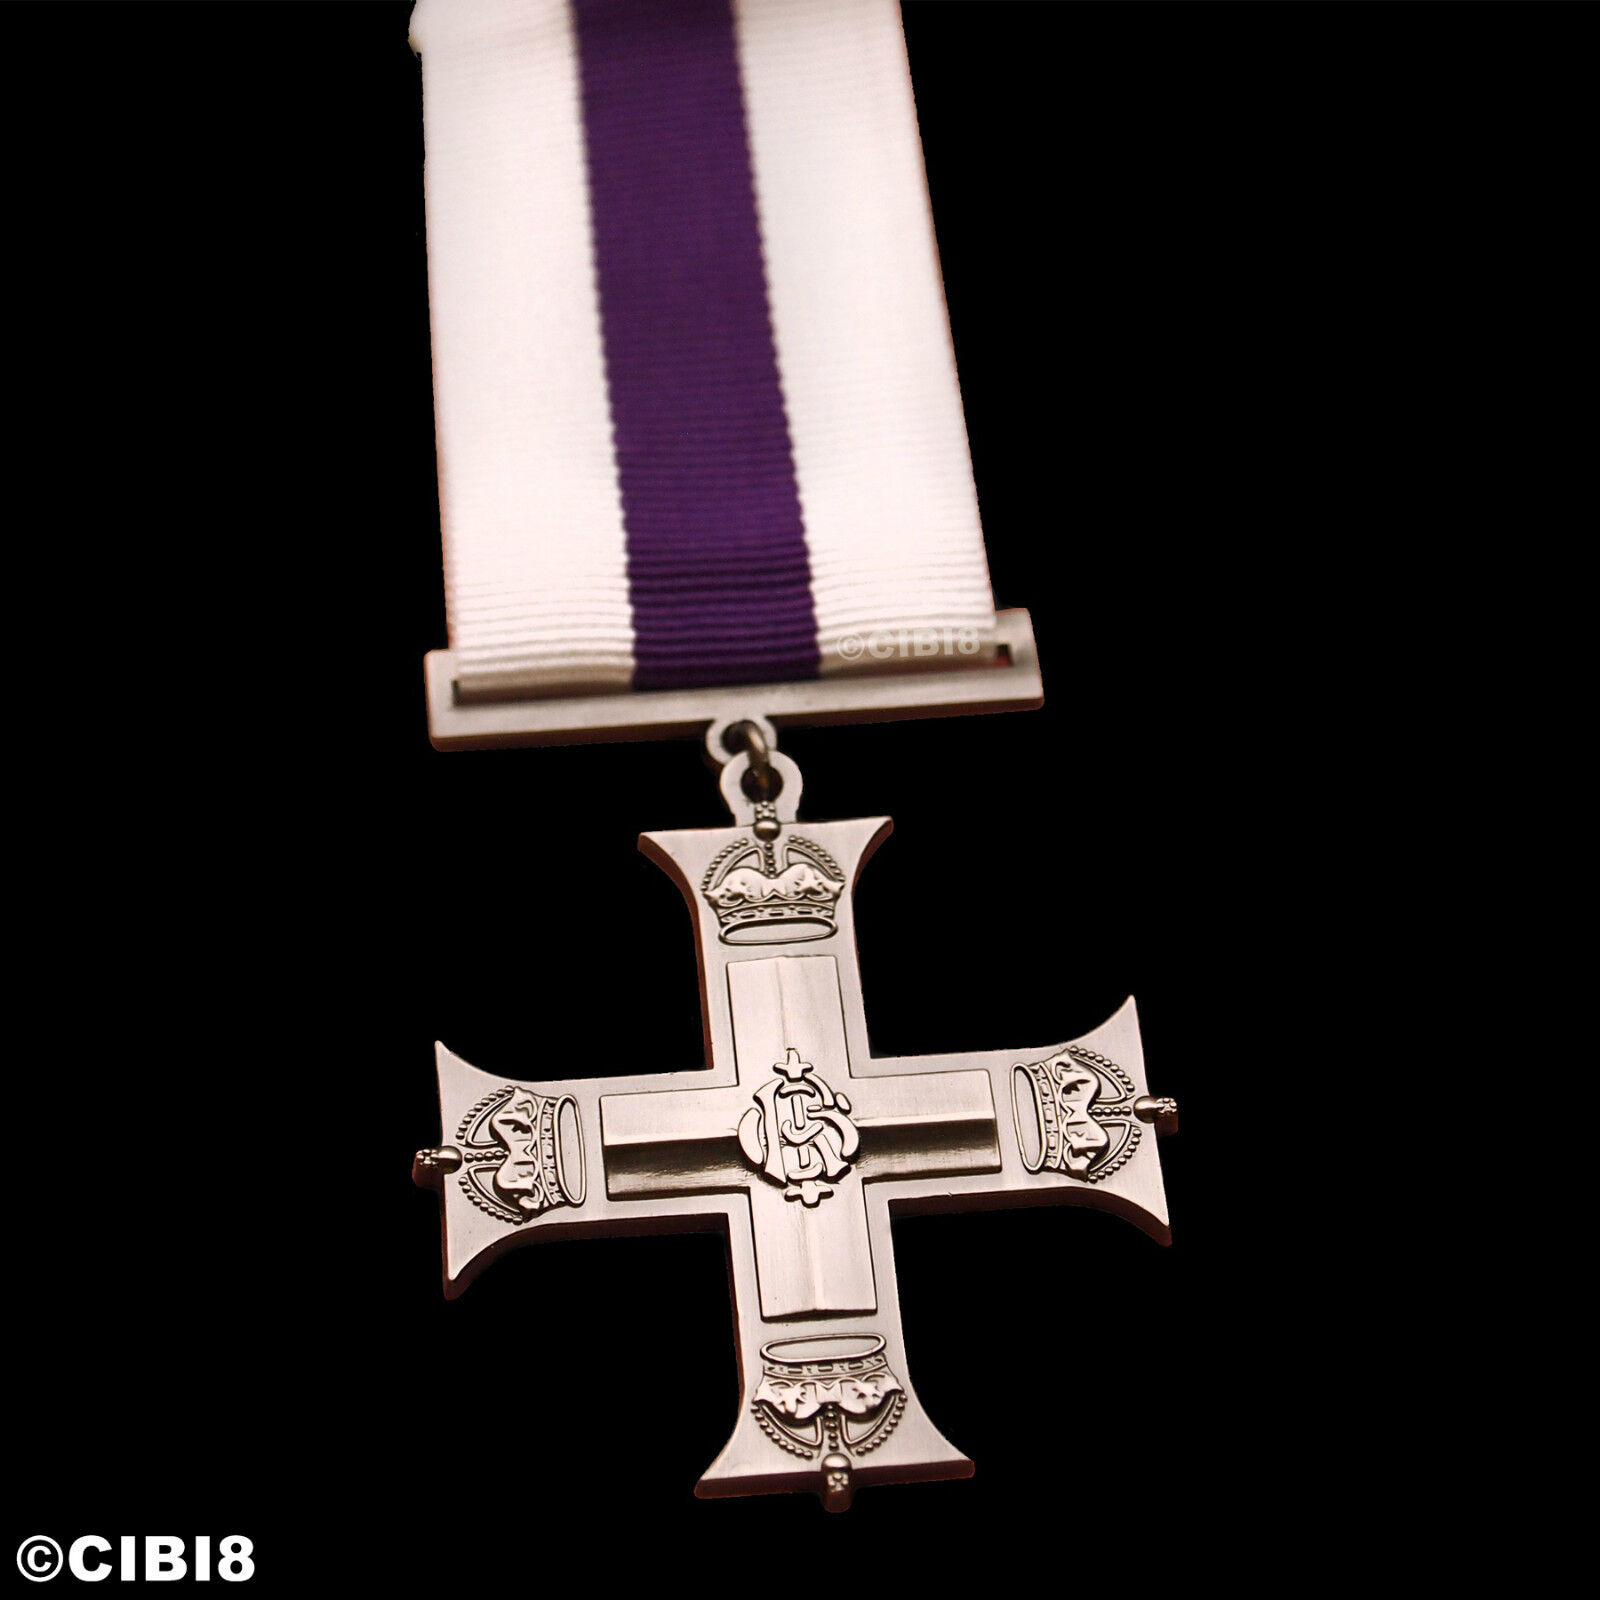  MILITARY CROSS GEORGE V MEDAL AWARD FOR GALLANTRY ALL RANKS RAF RN RM REPRO NEW